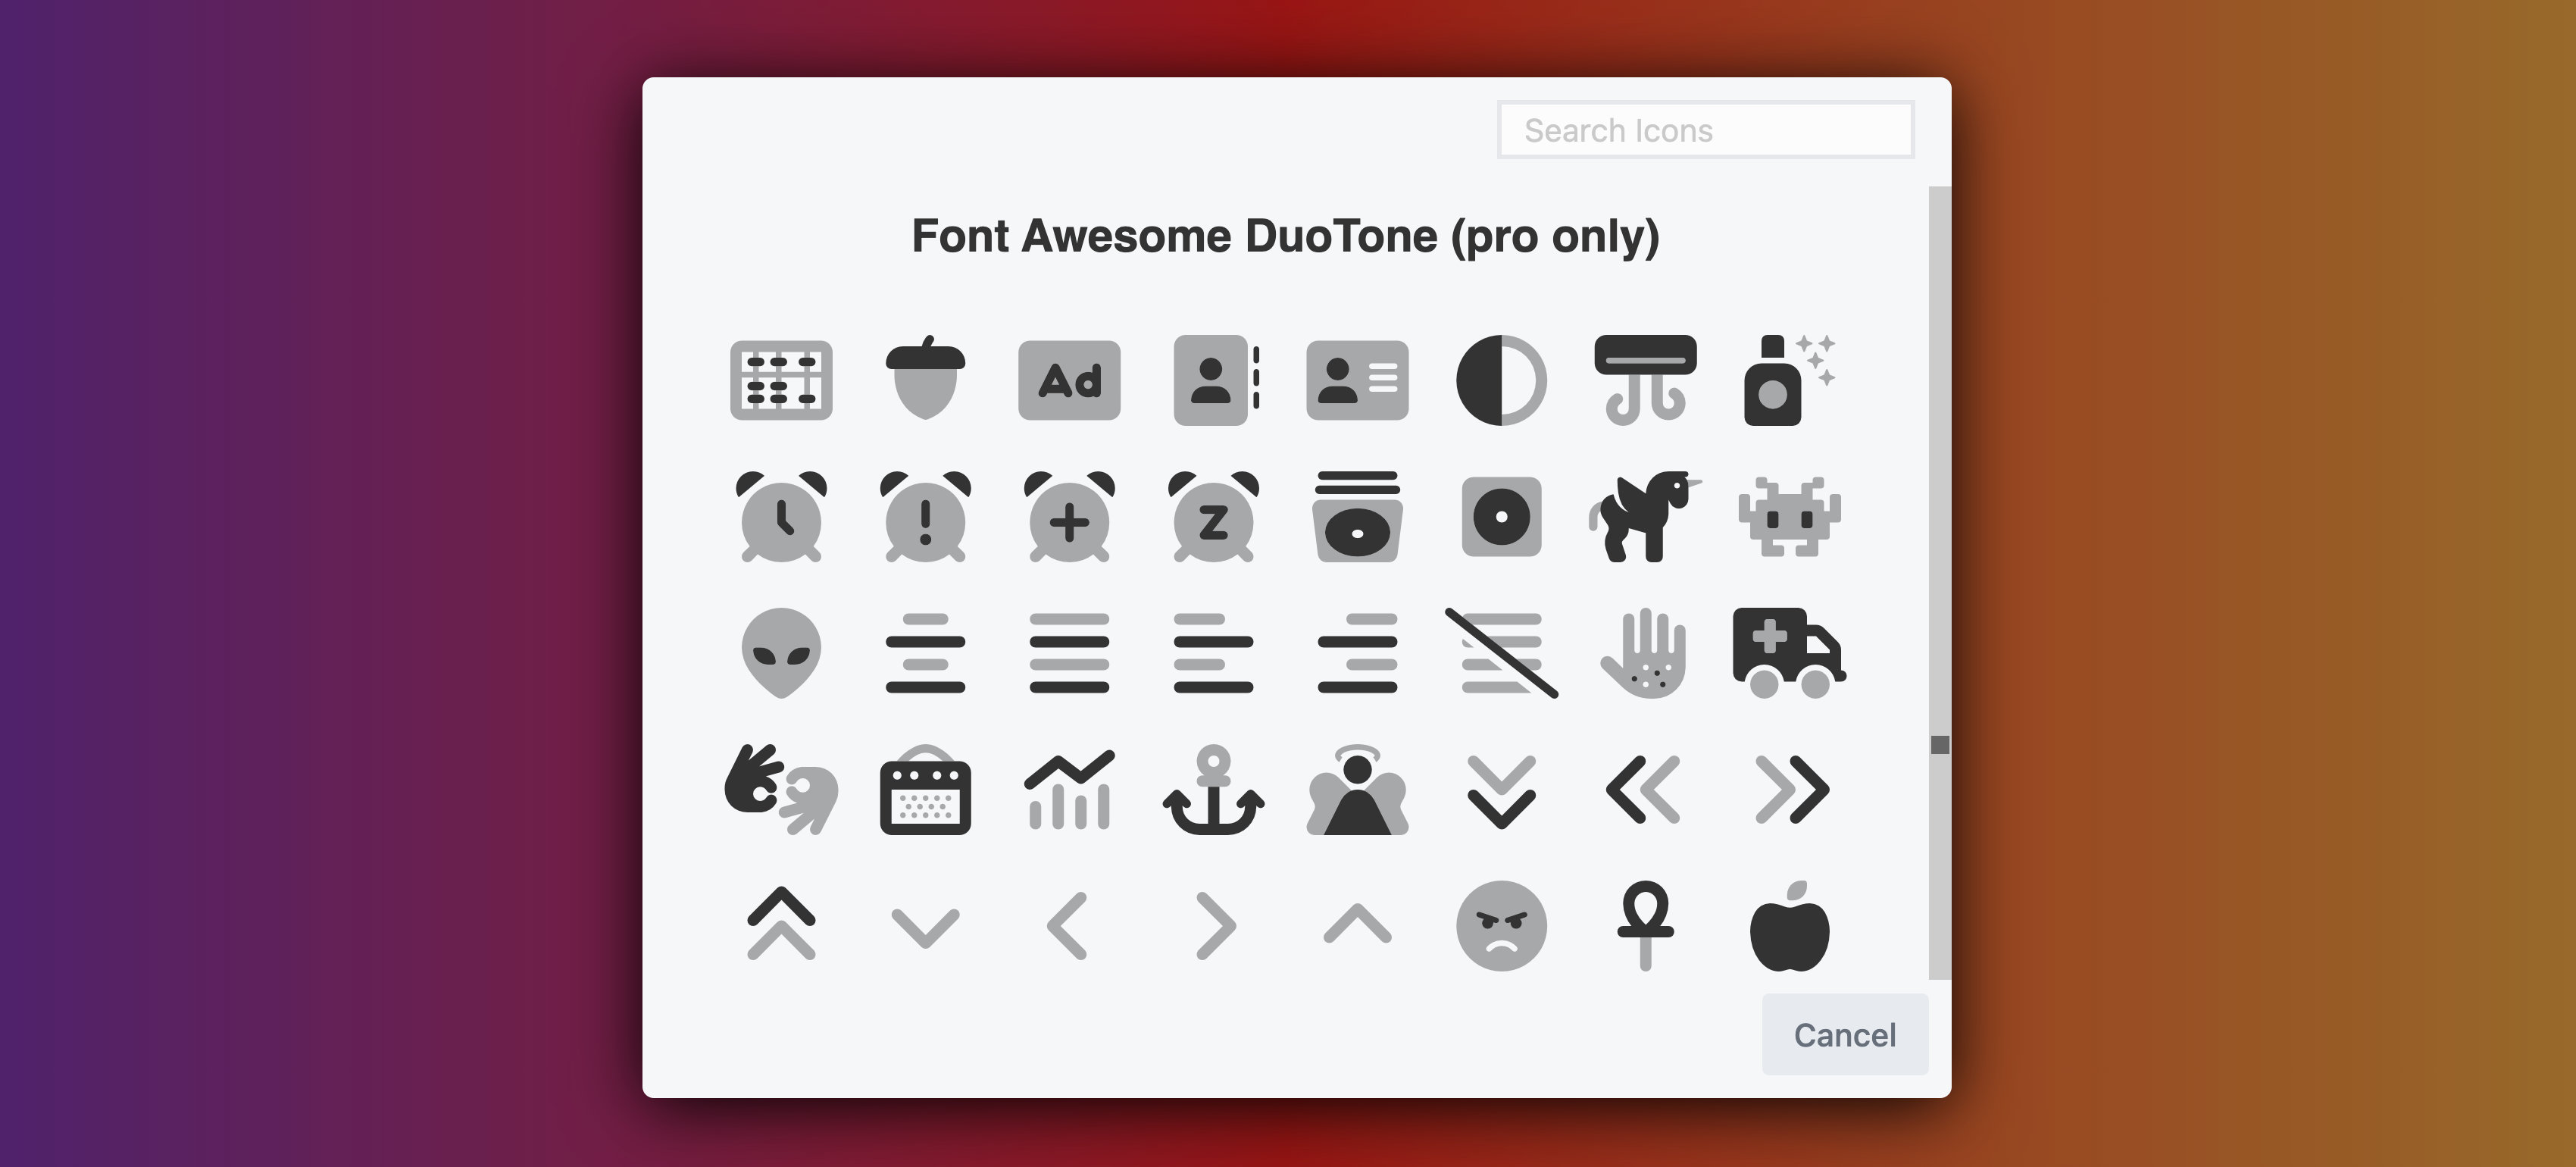 Enable Font Awesome Pro icons